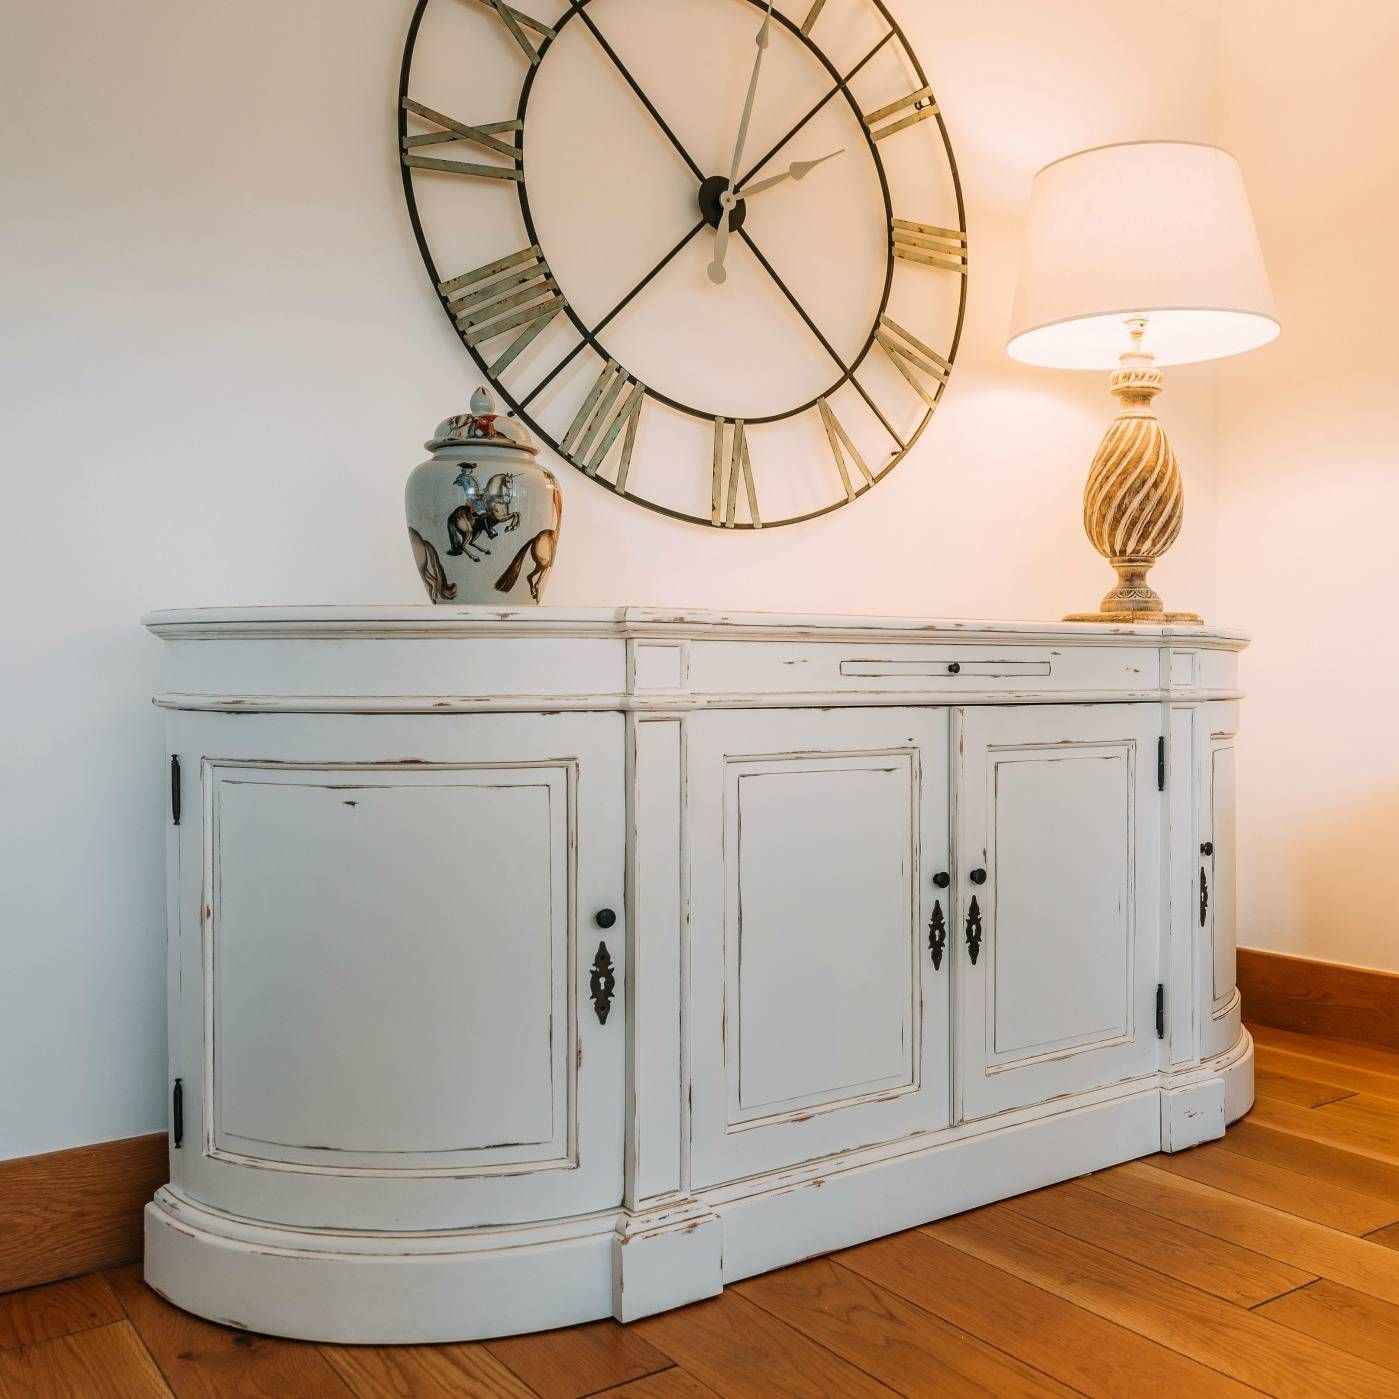 Aged French Distressed White Large Sideboard Furniture – La Maison Intended For Recent Large Sideboards (View 7 of 15)